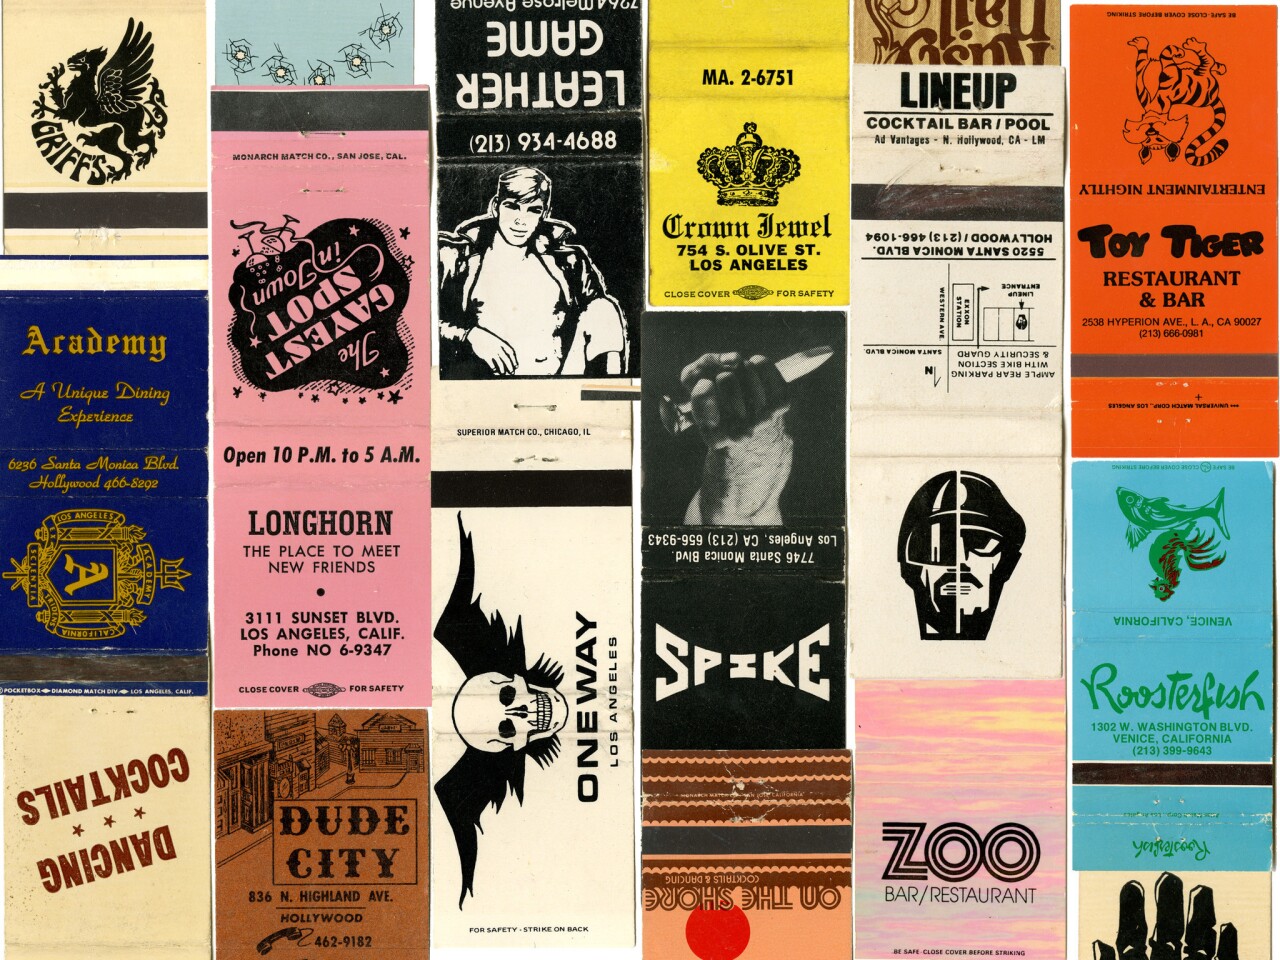 Exhibition of gay bar matchbooks.